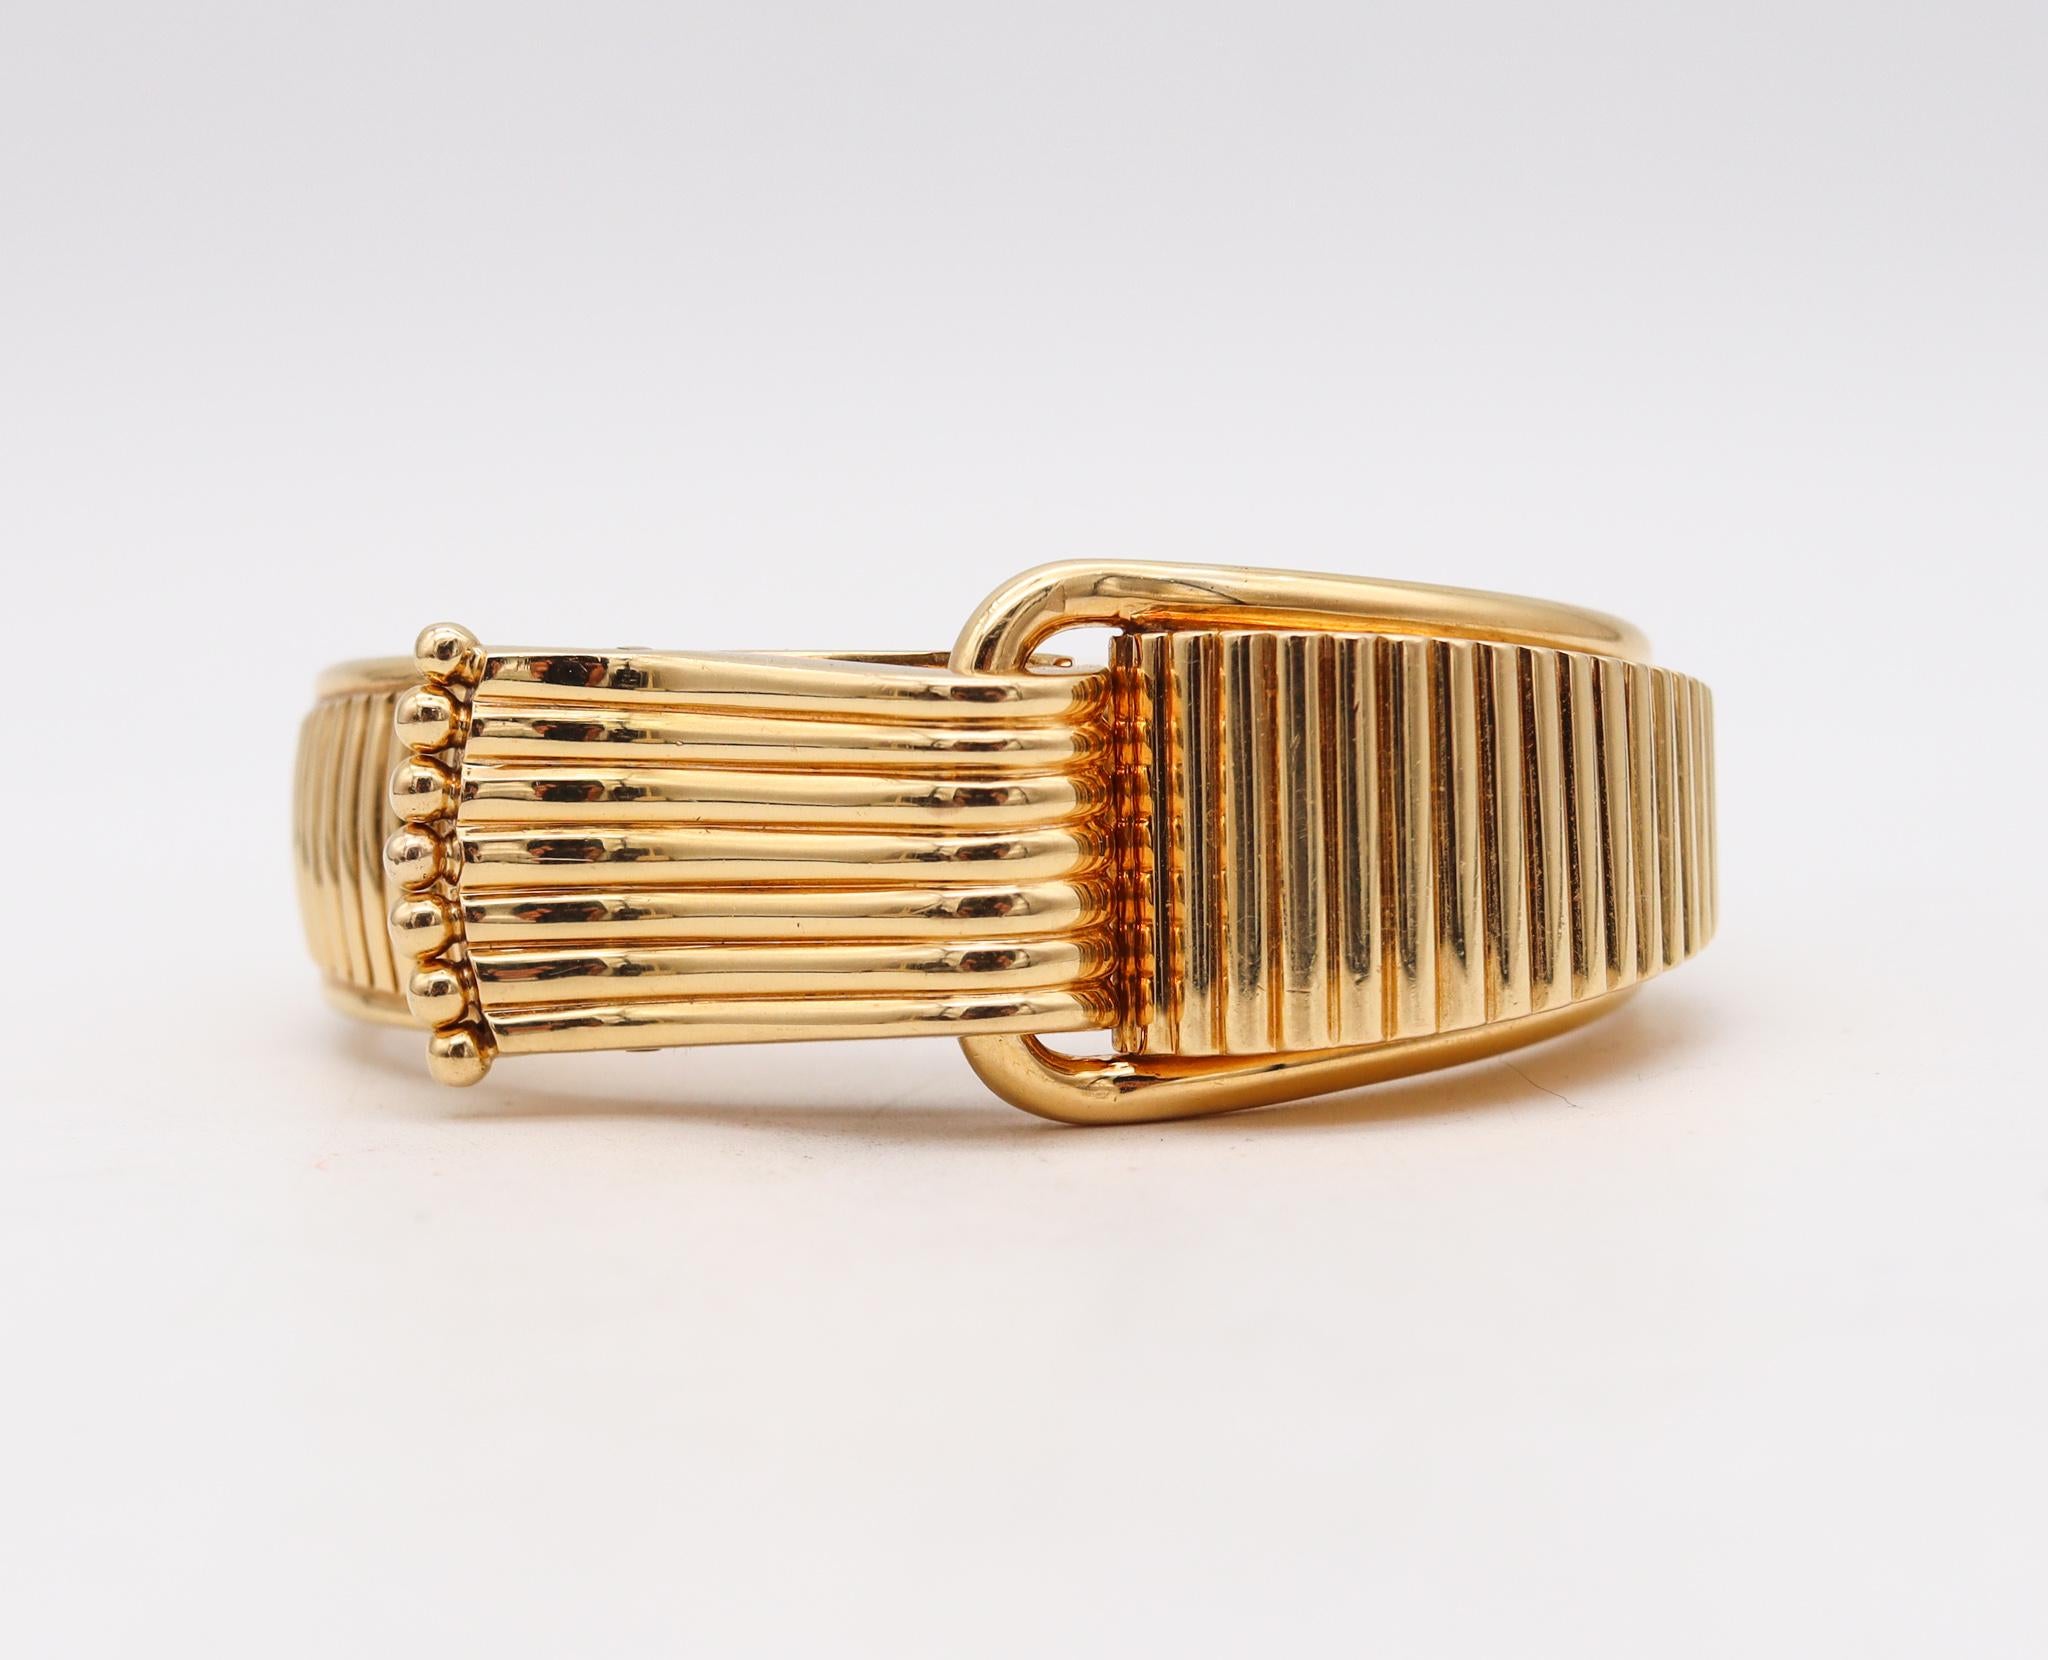 Art Deco 1930 Machine Age Geometric Bangle Bracelet in Solid 18Kt Yellow Gold In Excellent Condition For Sale In Miami, FL